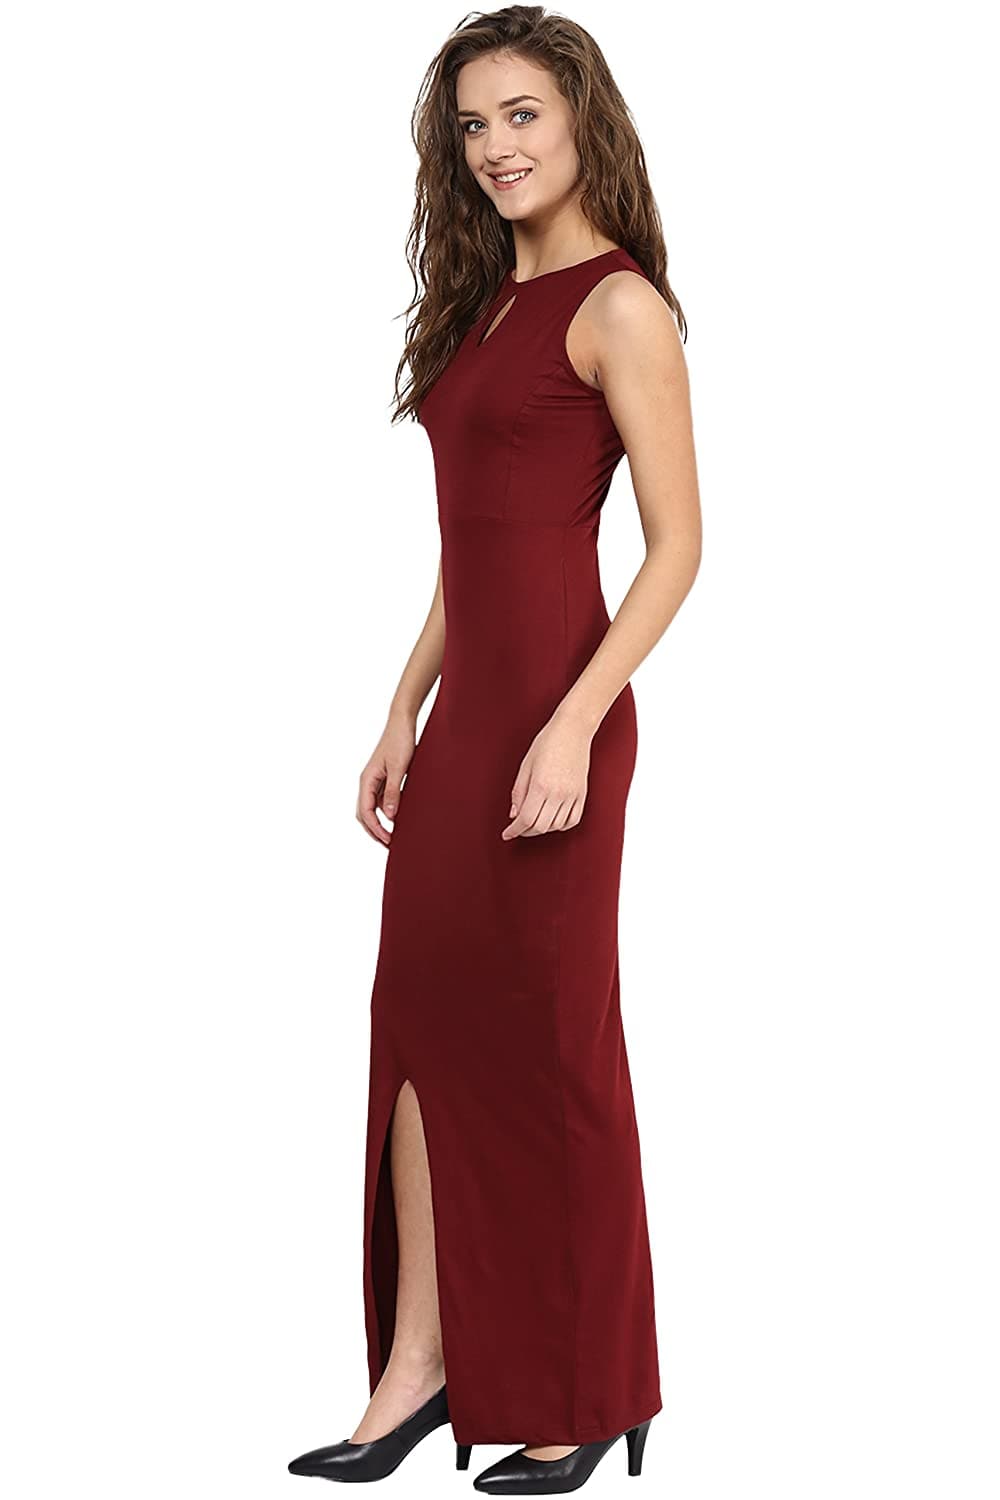 Maroon Round Neck Sleeveless Cut-Out Front Slit Slim Fit Maxi Dress